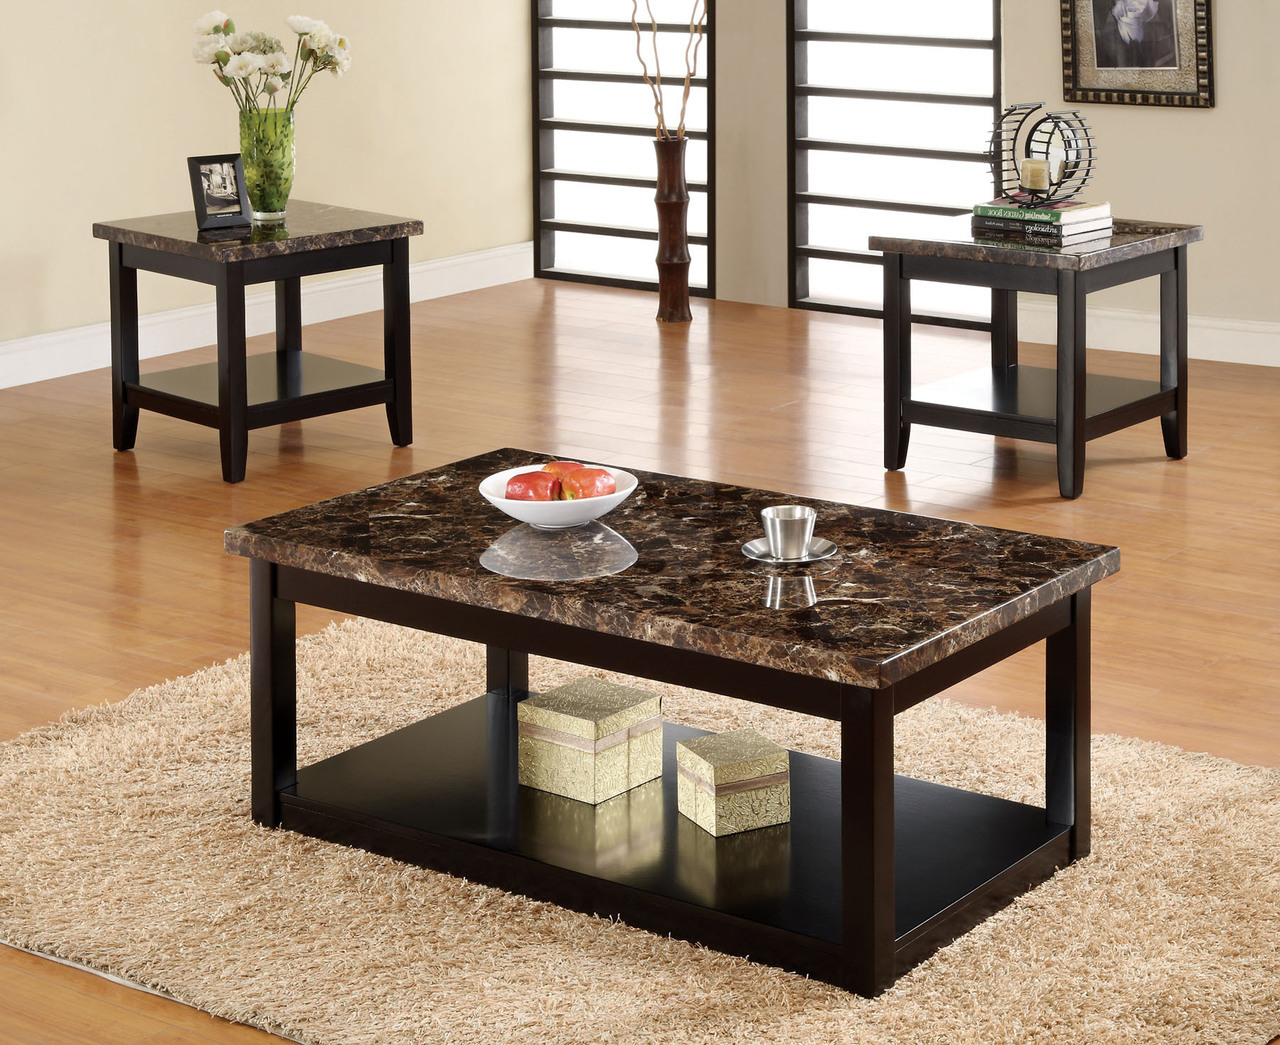 lawndale black solid wood faux marble top table end tables and coffee categories bayside furnishings old rustic tempered glass narrow wooden bedside mid century modern furniture